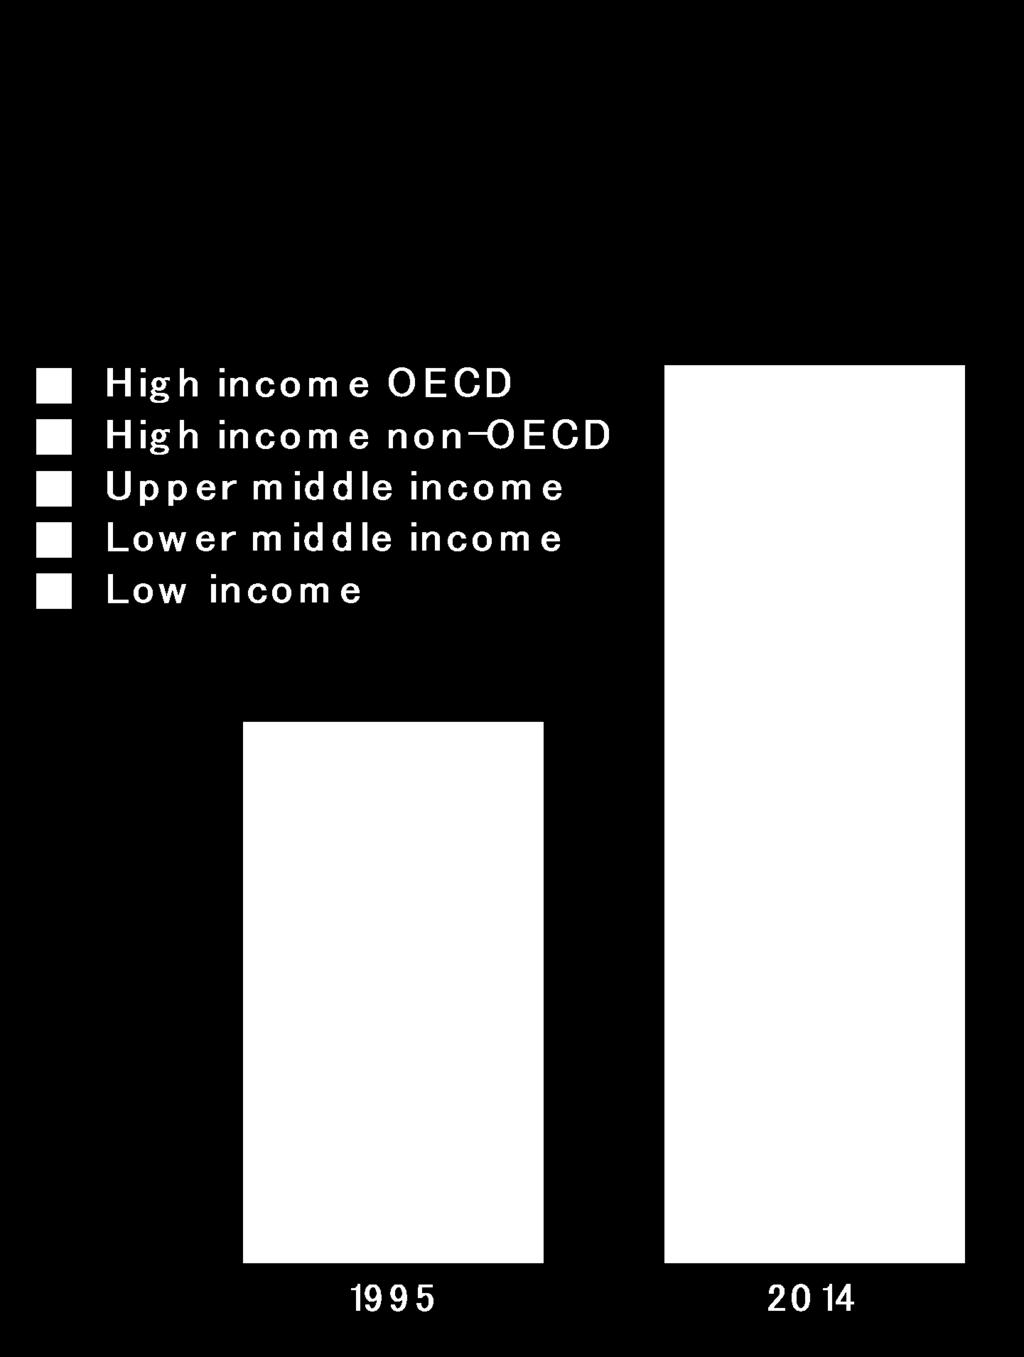 trillion The share held by Middle income countries